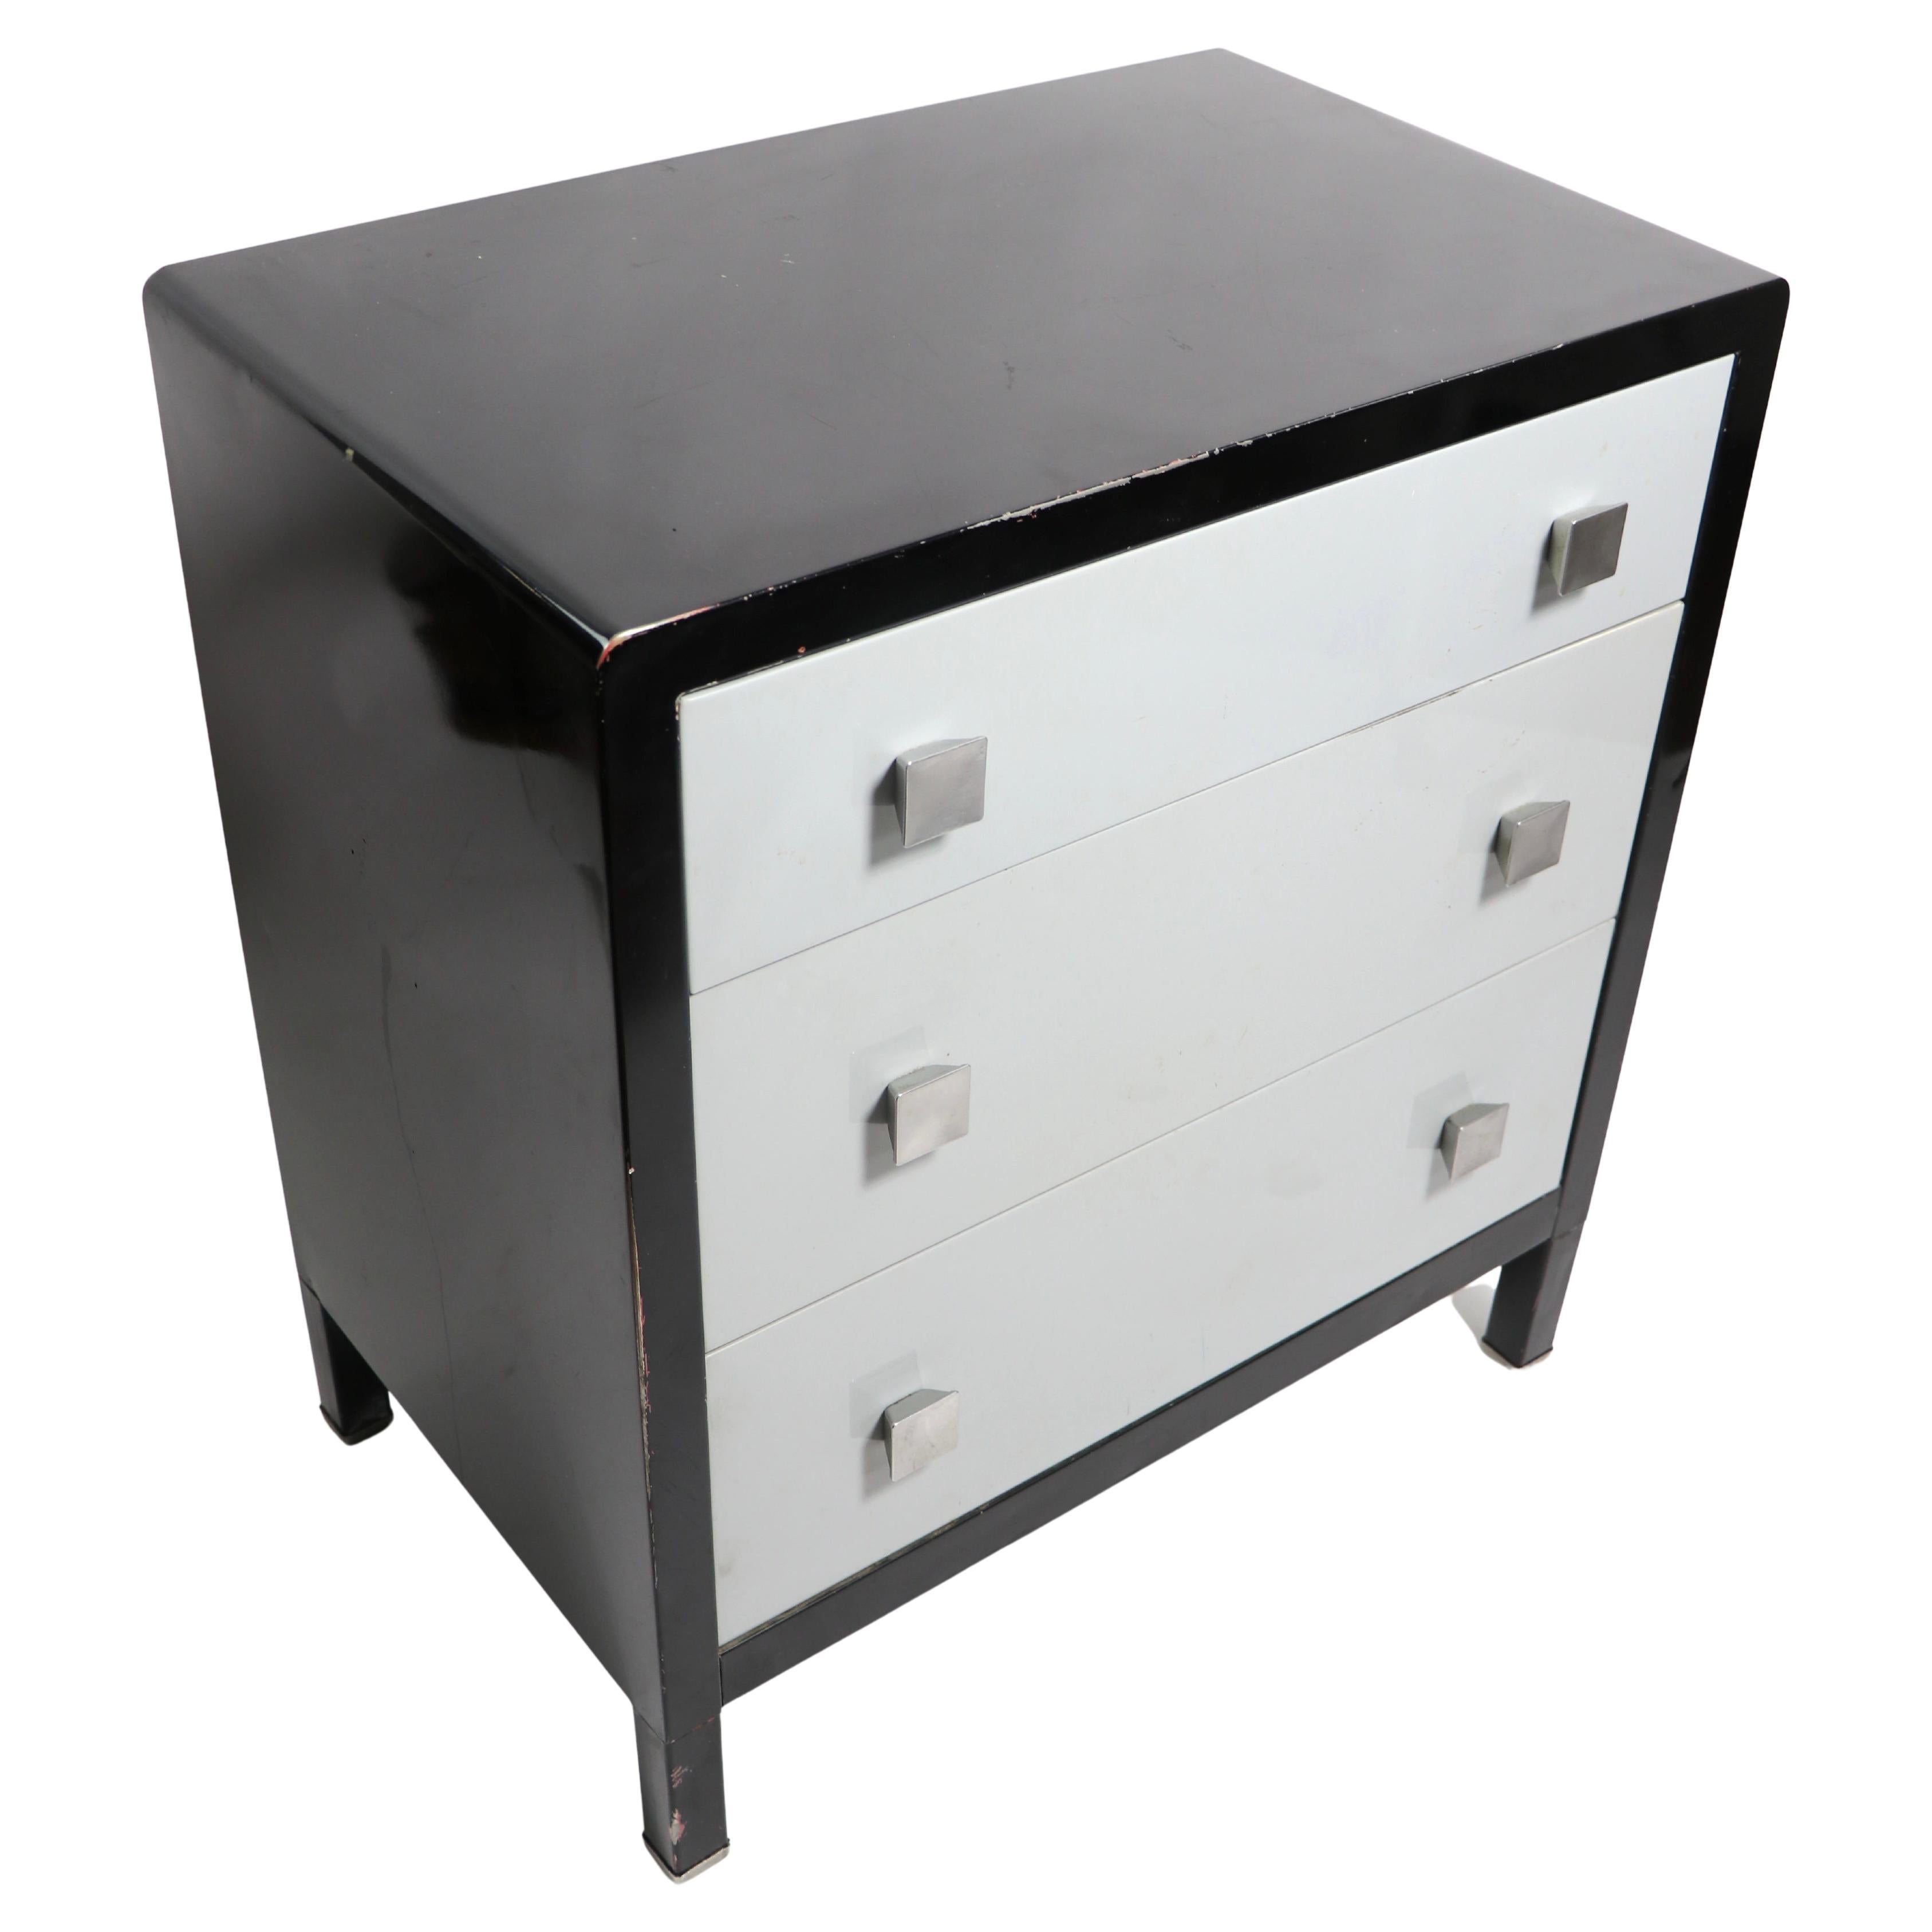 Diminutive Metal Bachelors Chest by Bel Geddes for Simmons